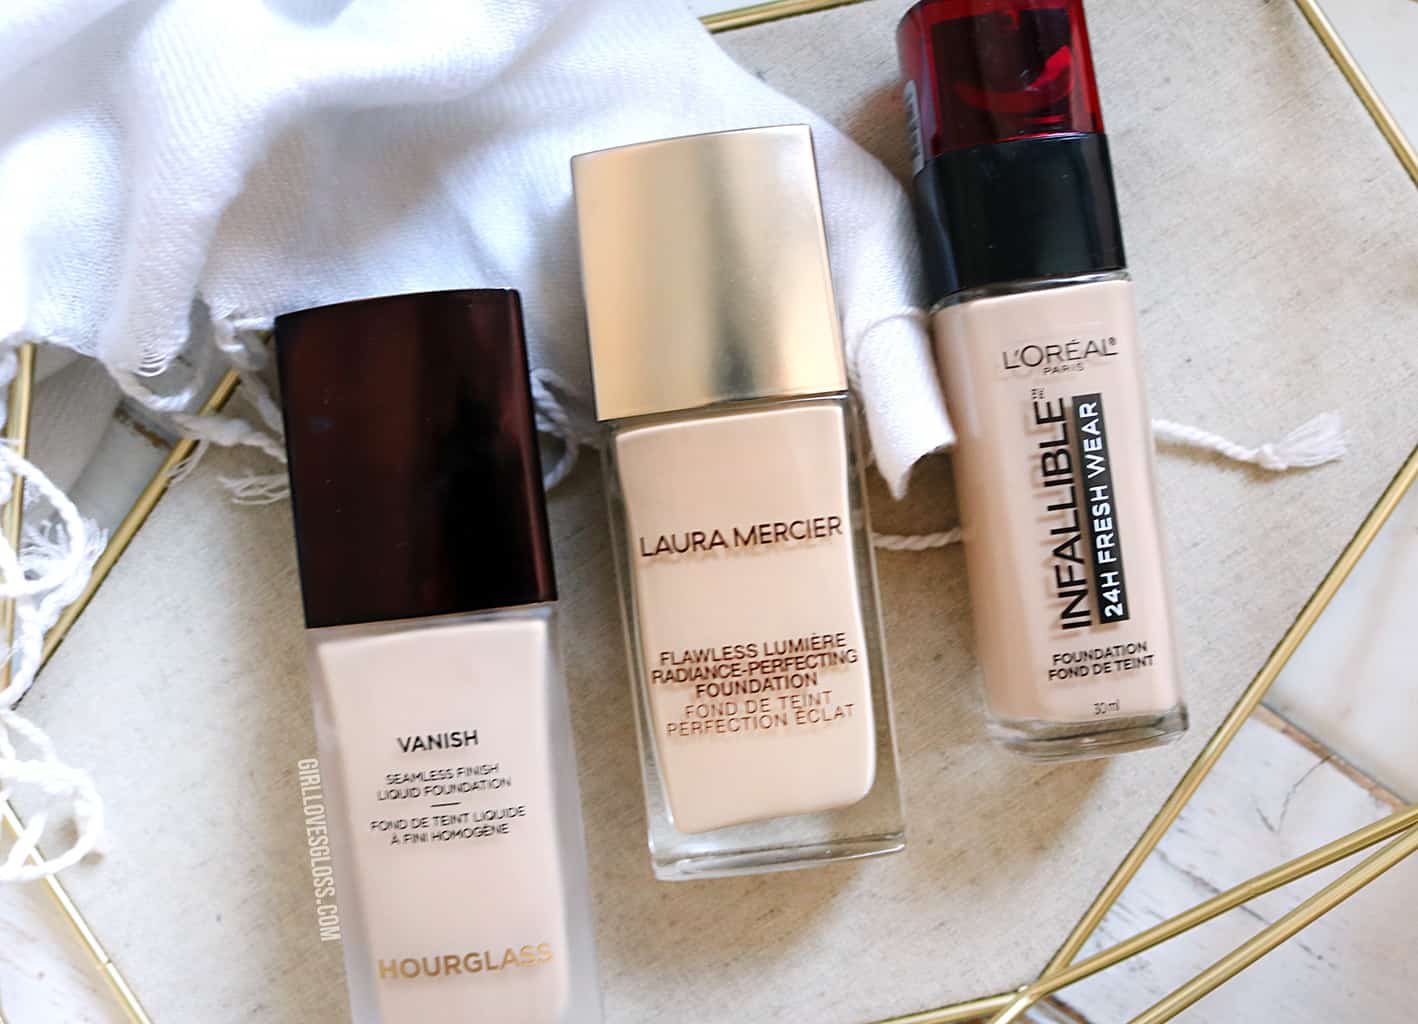 Trying the latest new foundations - Laura Mercier, Hourglass and L'Oreal